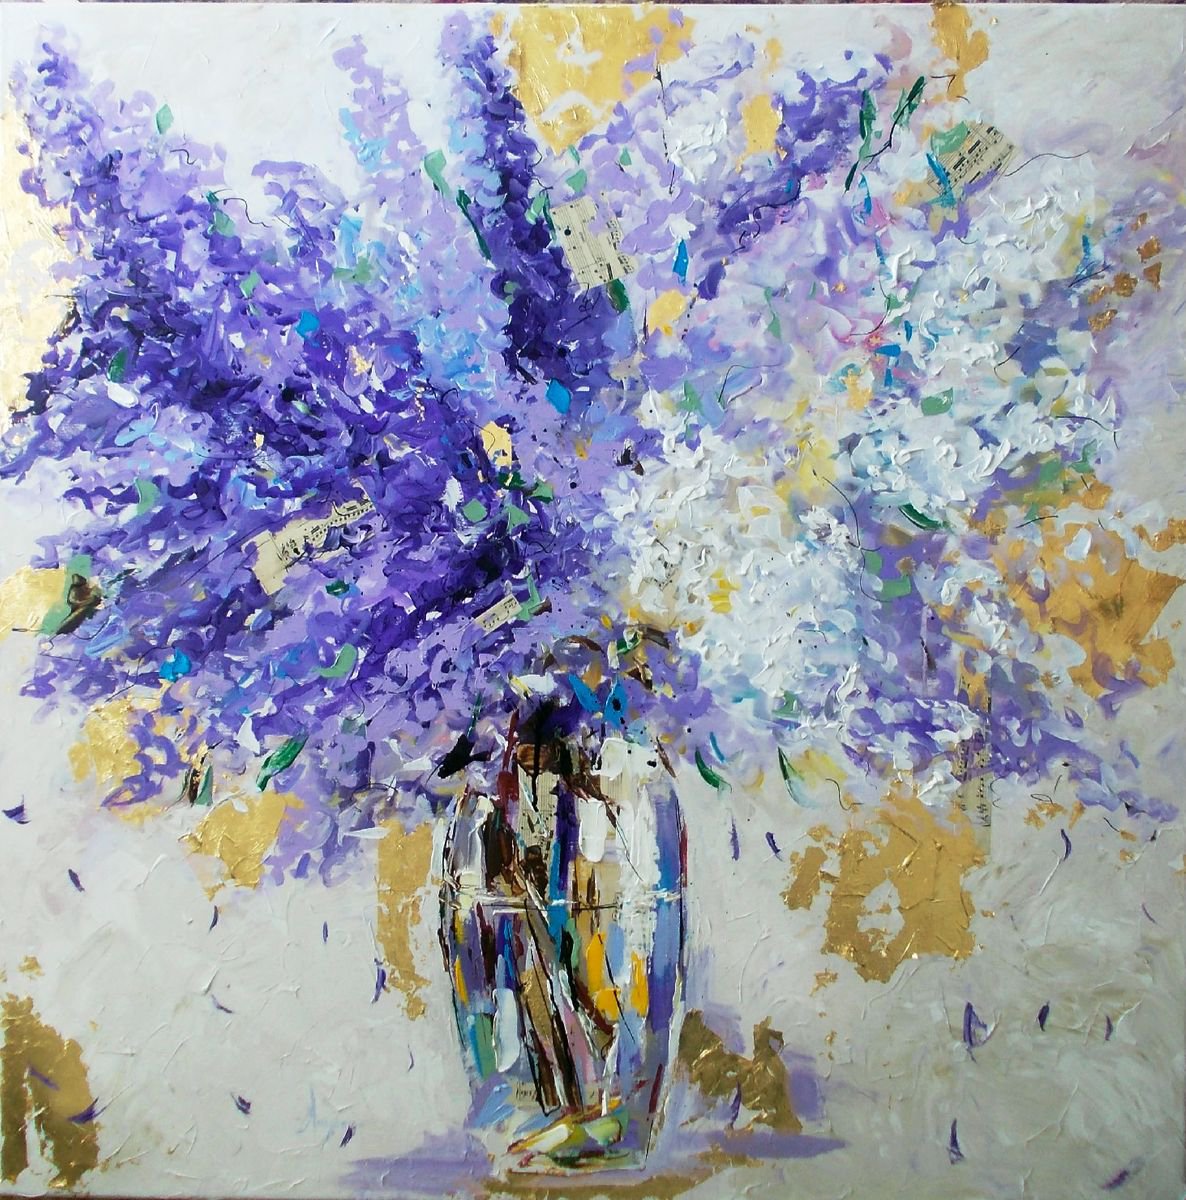 Lilacs in vase III-Acrylic- mixed media painting on canvas by Antigoni Tziora